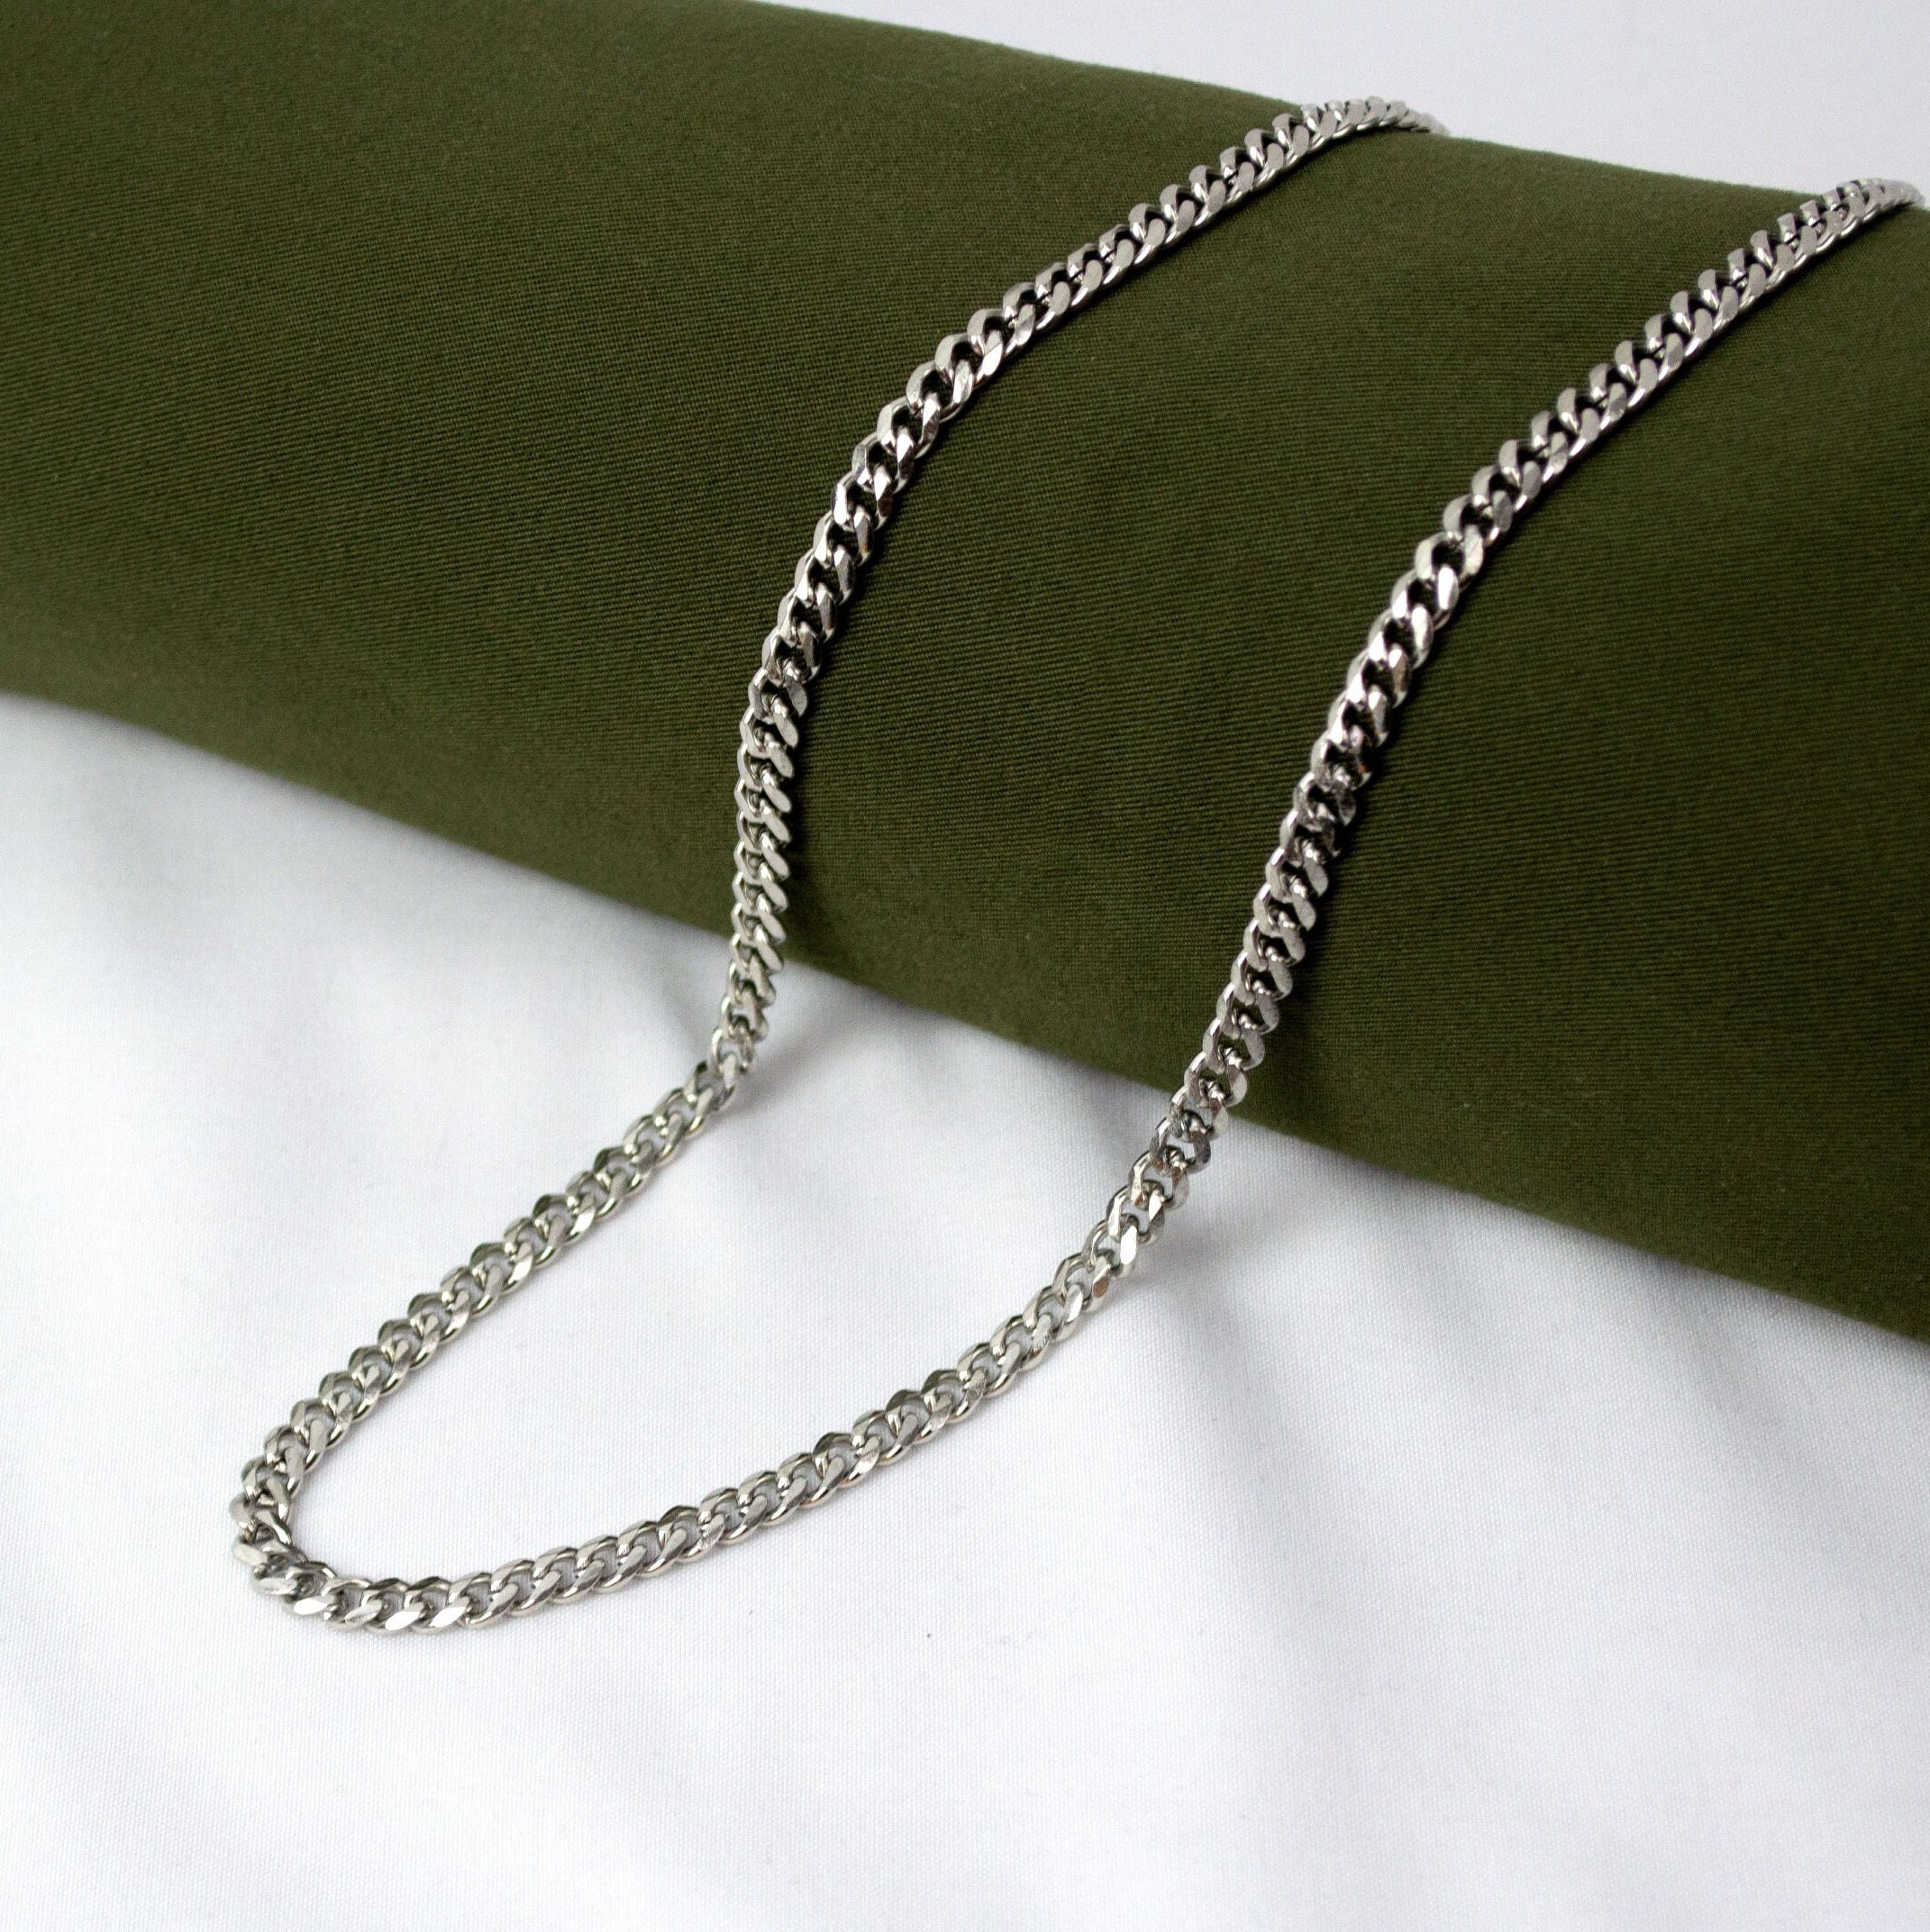 Men's Chain / Silver 6mm Curb Chain Necklace for Men or Woman / Stainless  Steel Waterproof Silver Necklace / Thick Chunky Curb Chain / Gift 